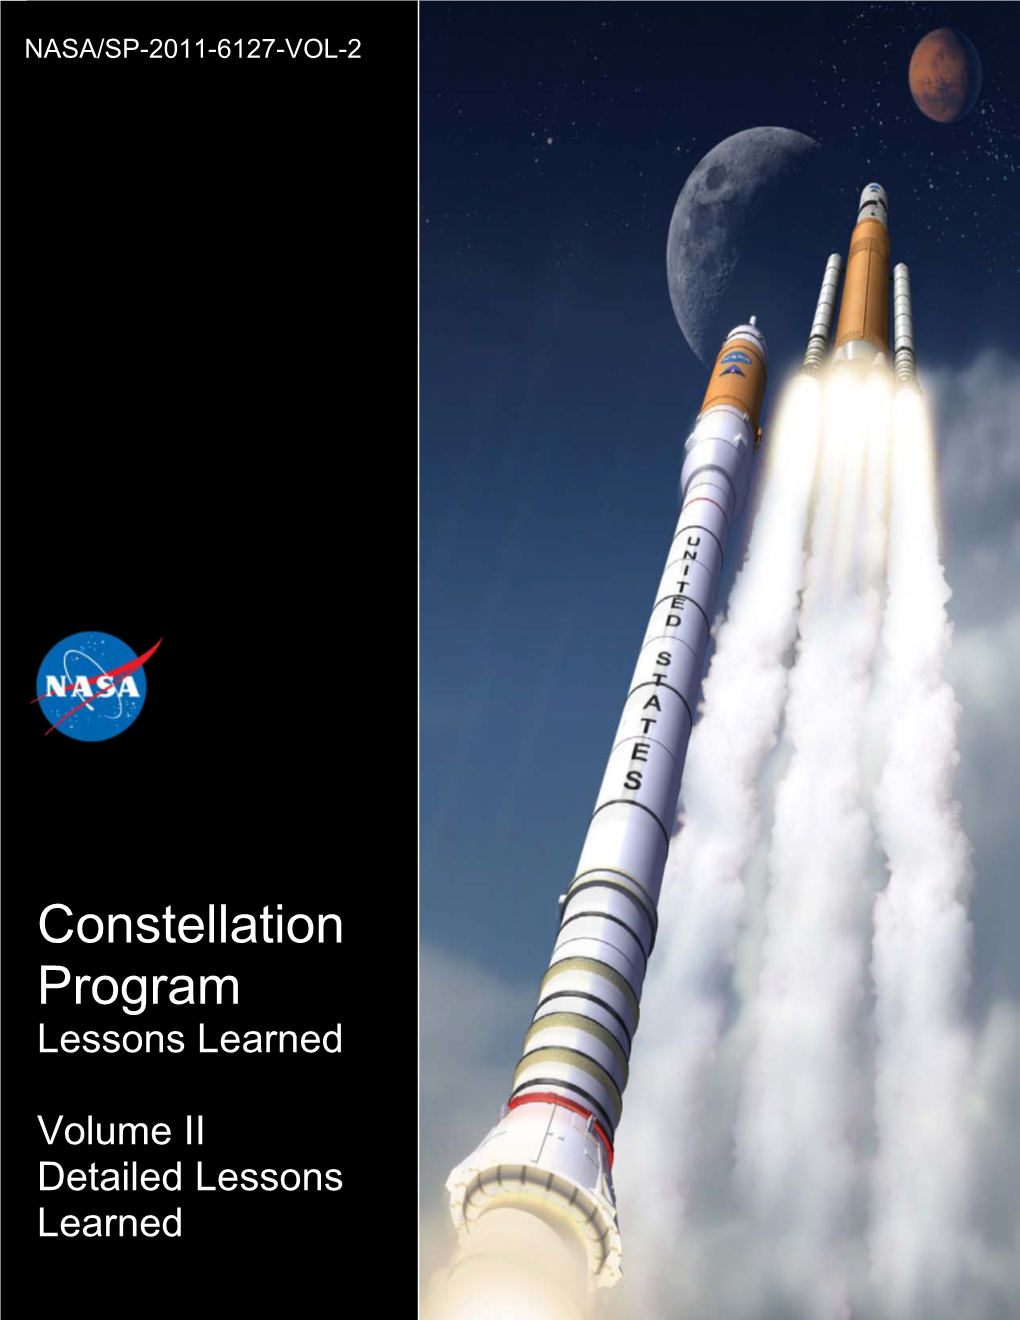 Constellation Program Lessons Learned